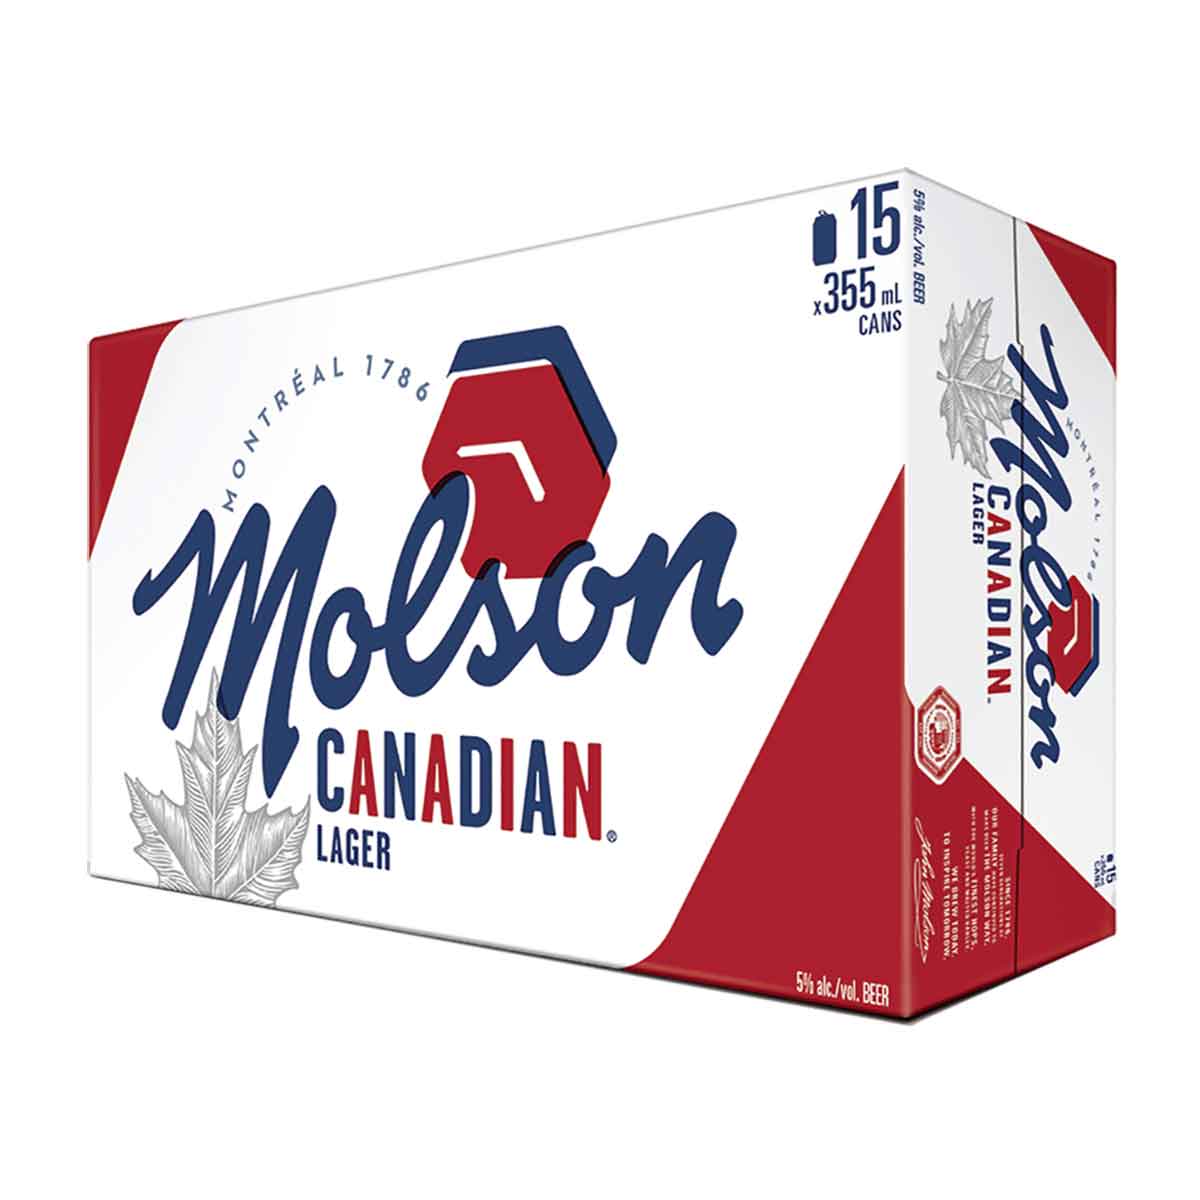 TAG Liquor Stores BC-MOLSON CANADIAN LAGER 15 CANS